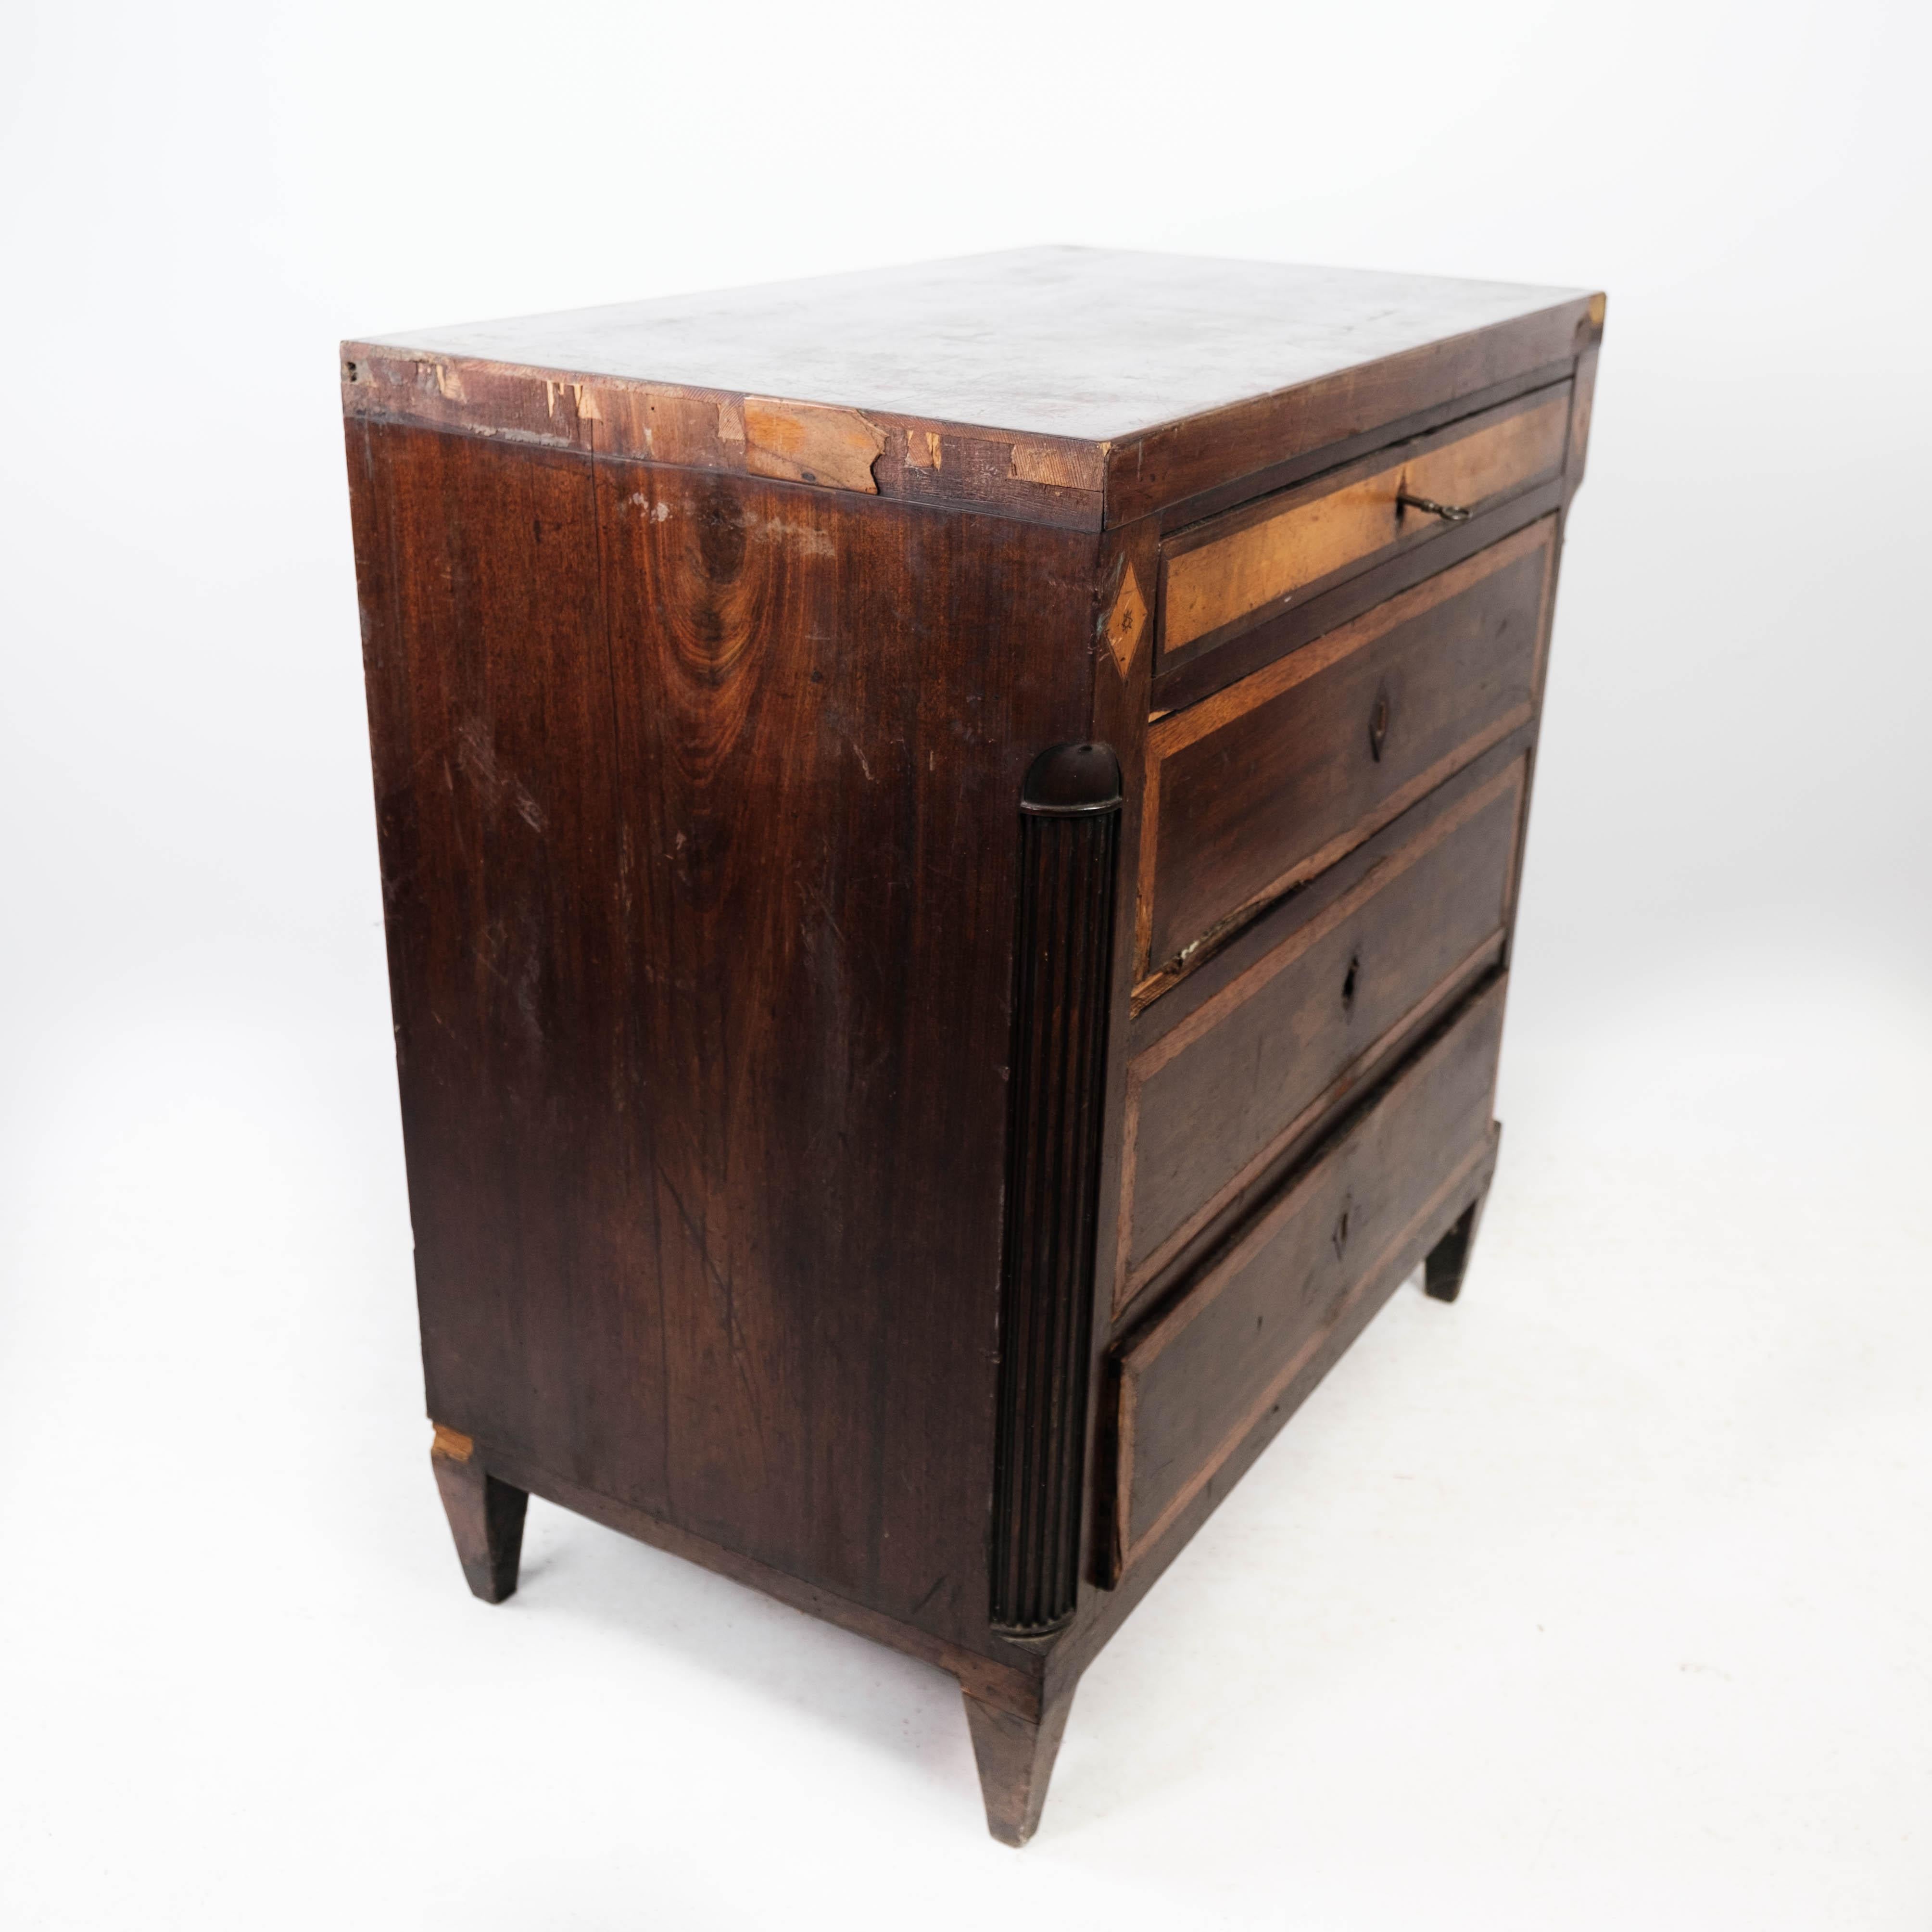 Louis Seize Chest of Drawers Made In Mahogany With Inlaid Wood From 1790s For Sale 6